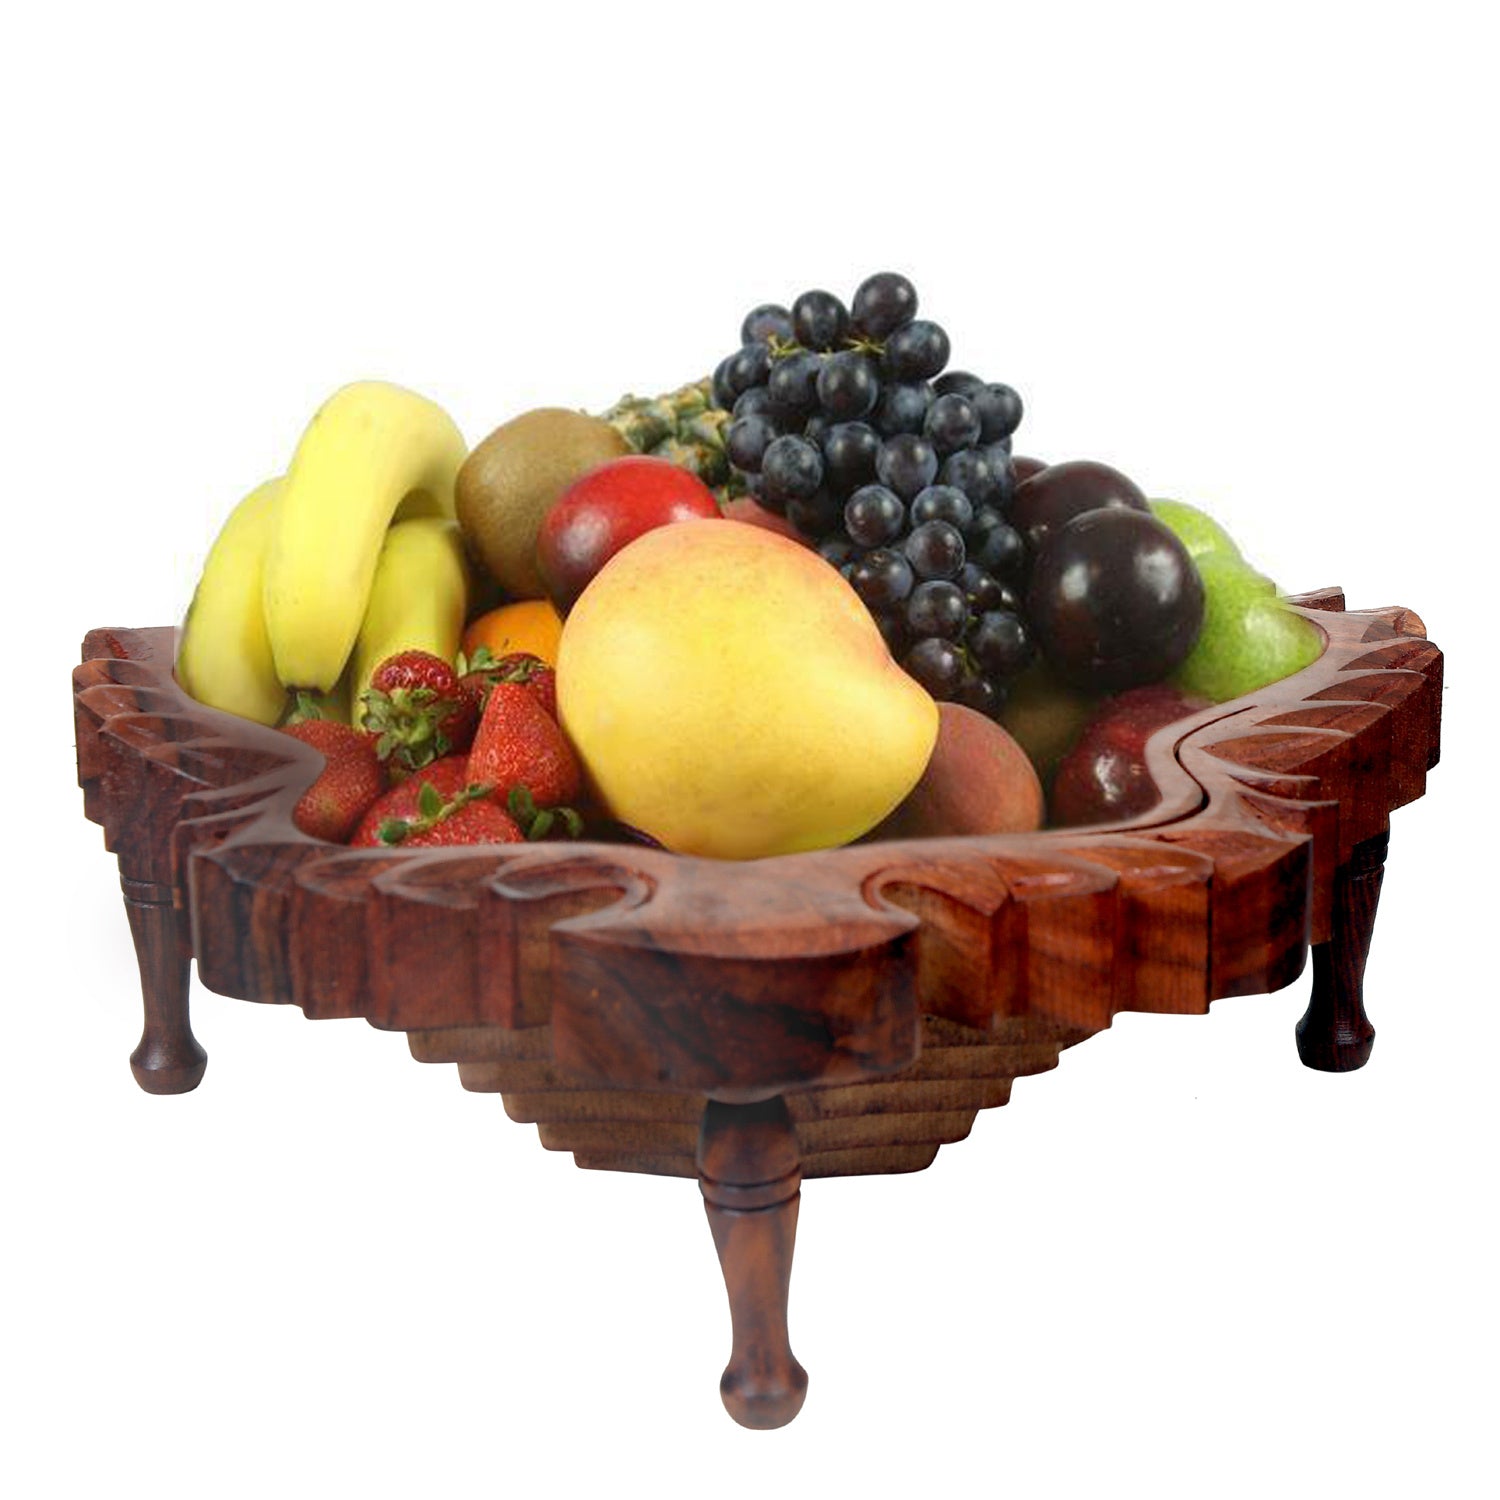 A Wooden Handmade Collapsible Foldable Fruit Basket Serving Bowl with a leaf-shaped design, crafted from Sheesham wood.